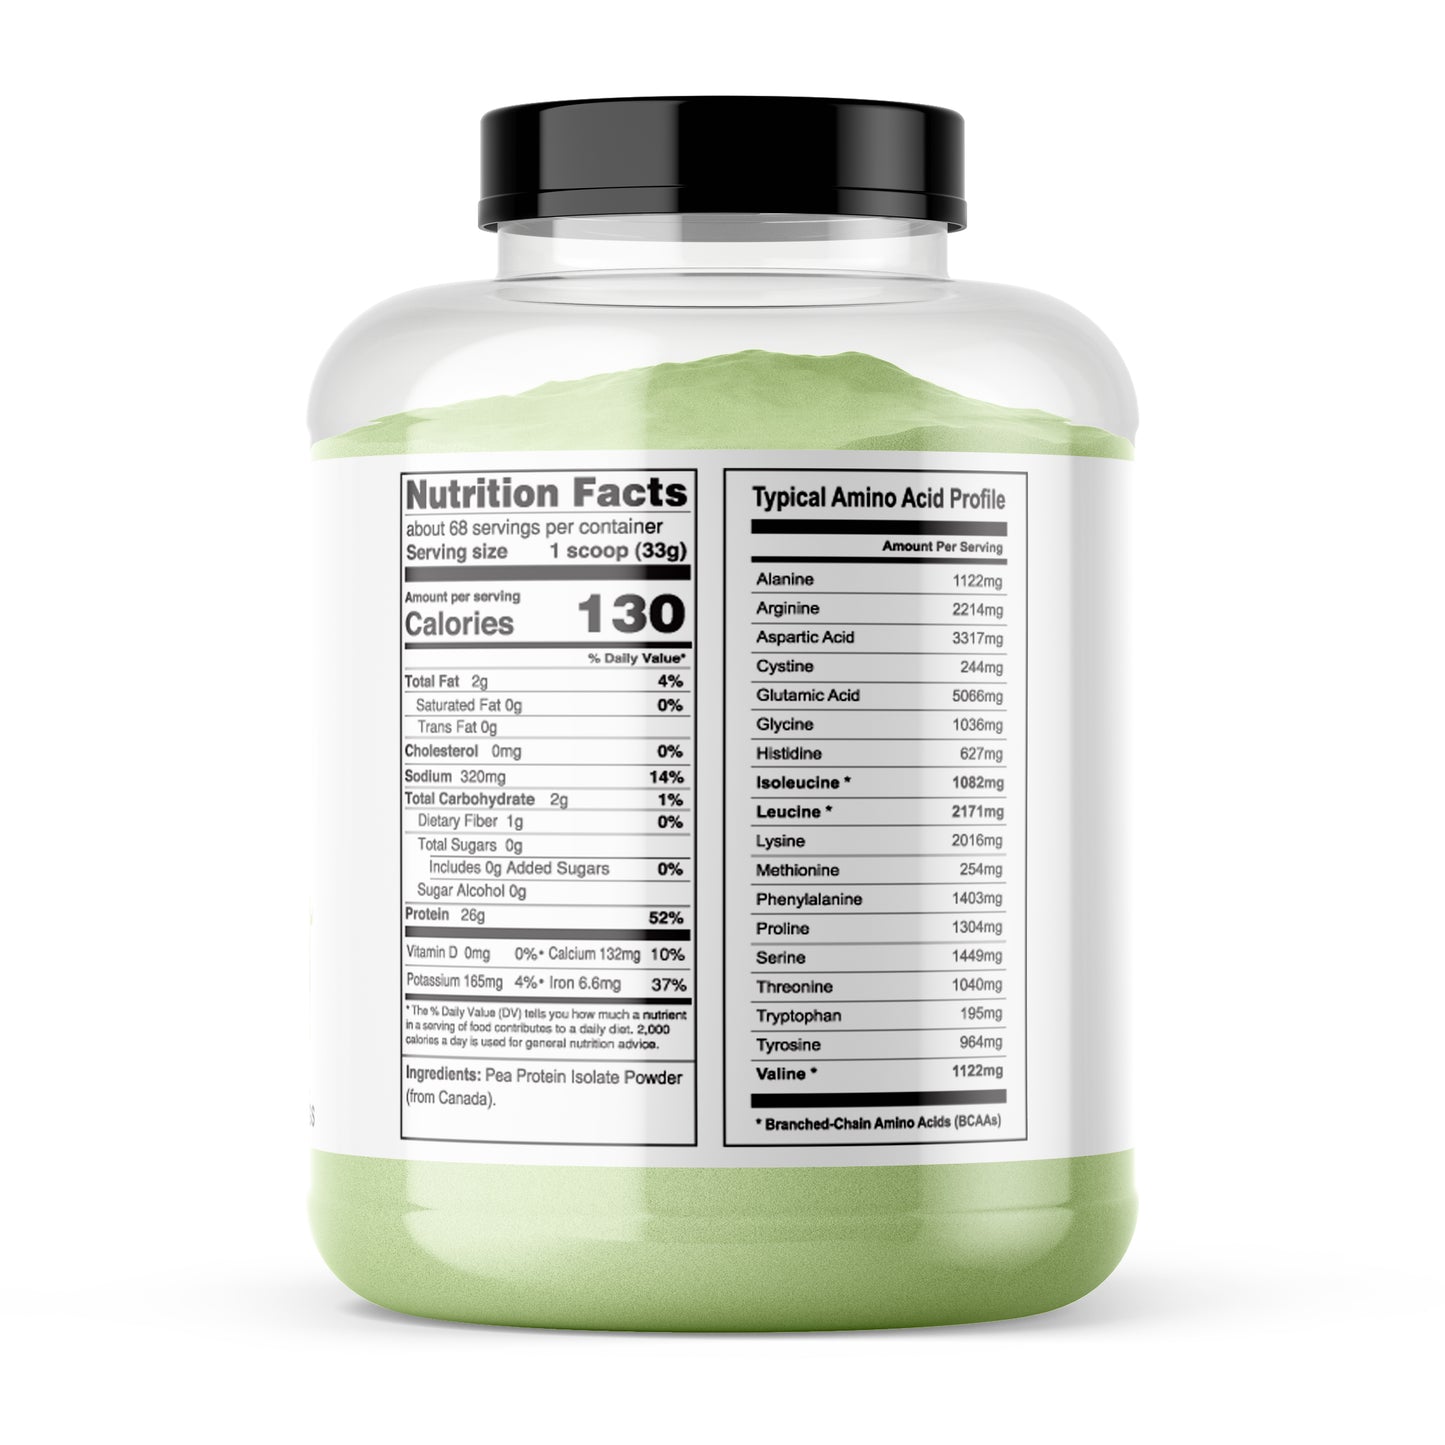 It's Just! - Pea Protein Isolate